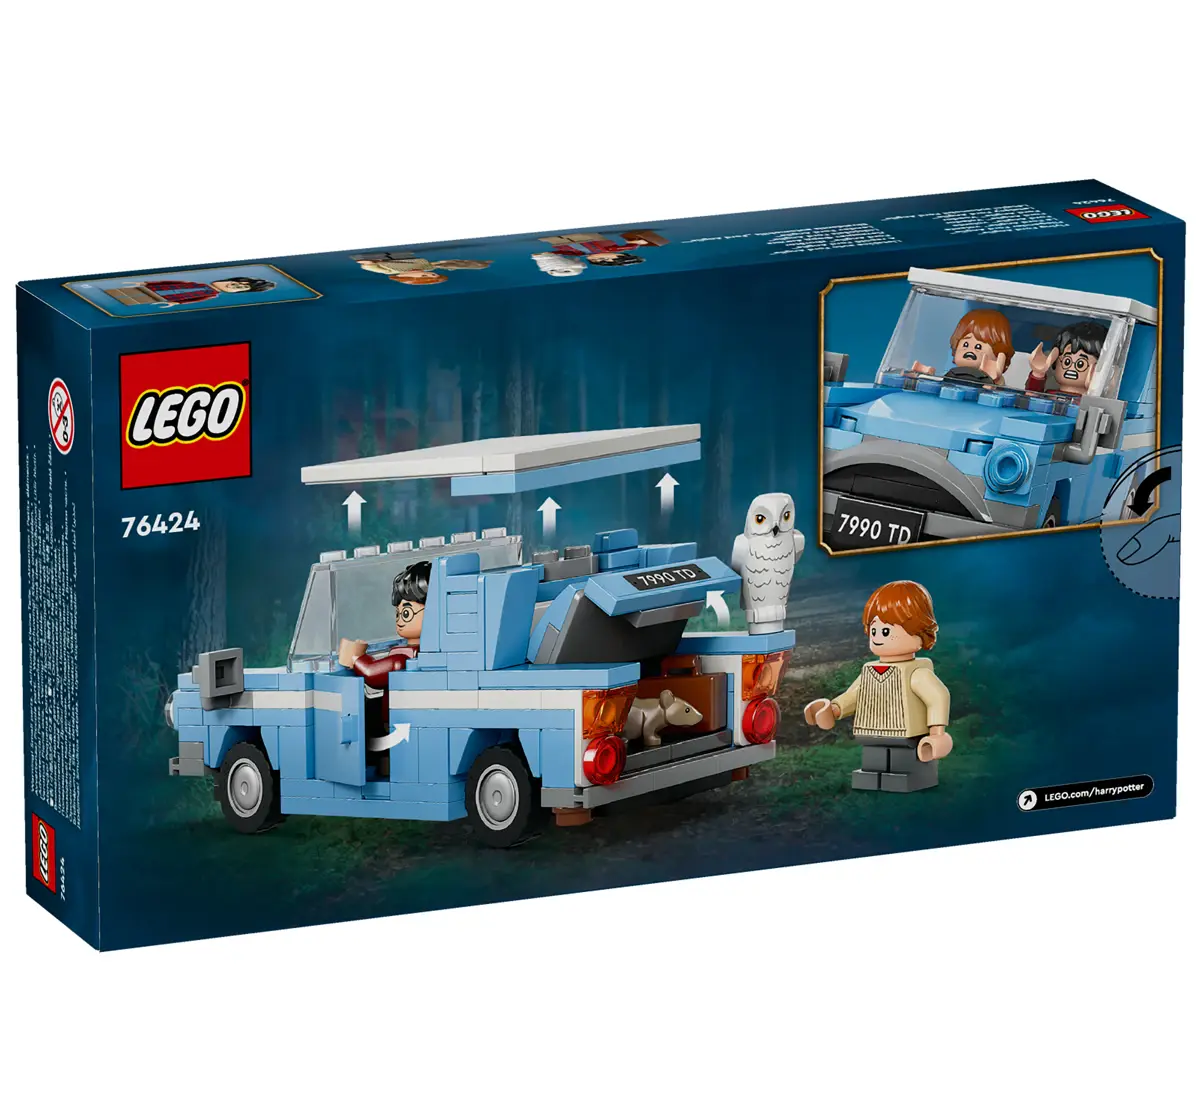 LEGO Harry Potter Flying Ford Anglia Car Toy 76424 (1212 Pieces)